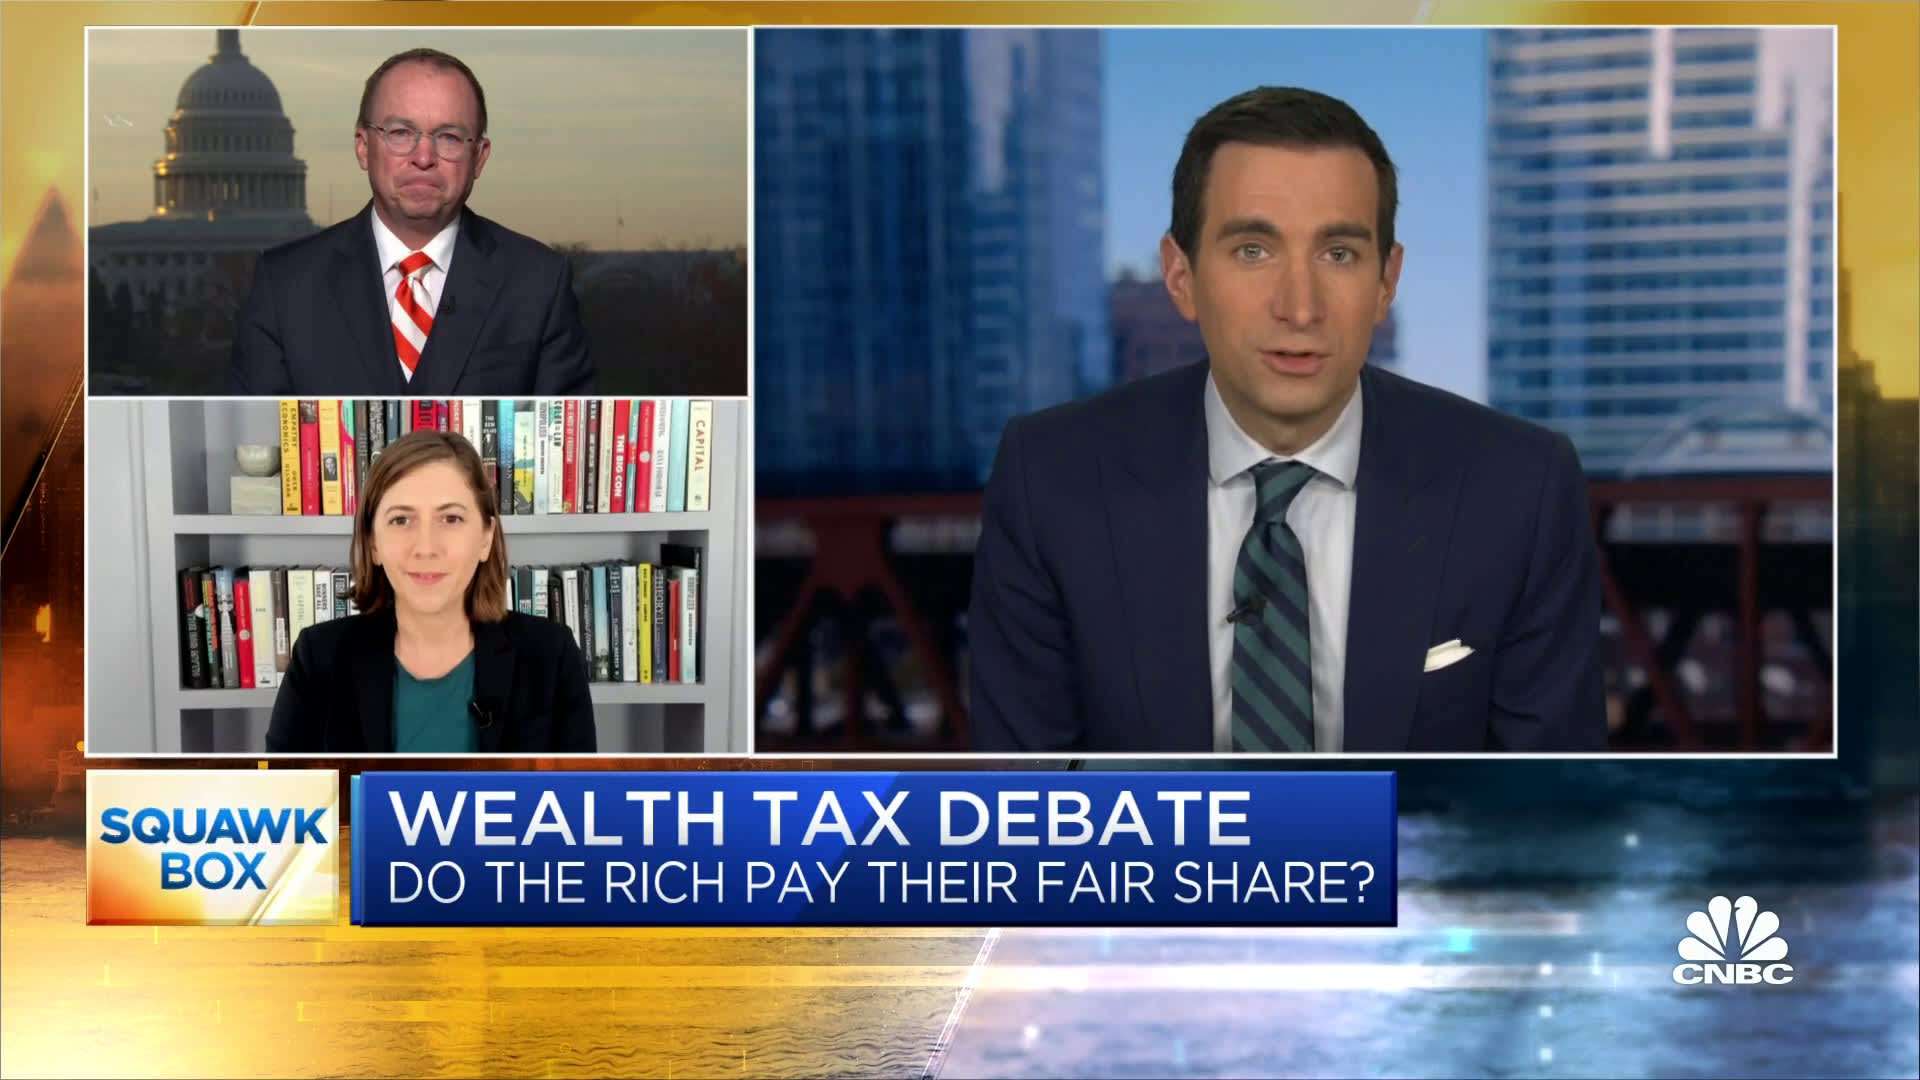 Wealth tax is trying to get at the 'fundamental unfairness' of our current tax code: Kitty Richards